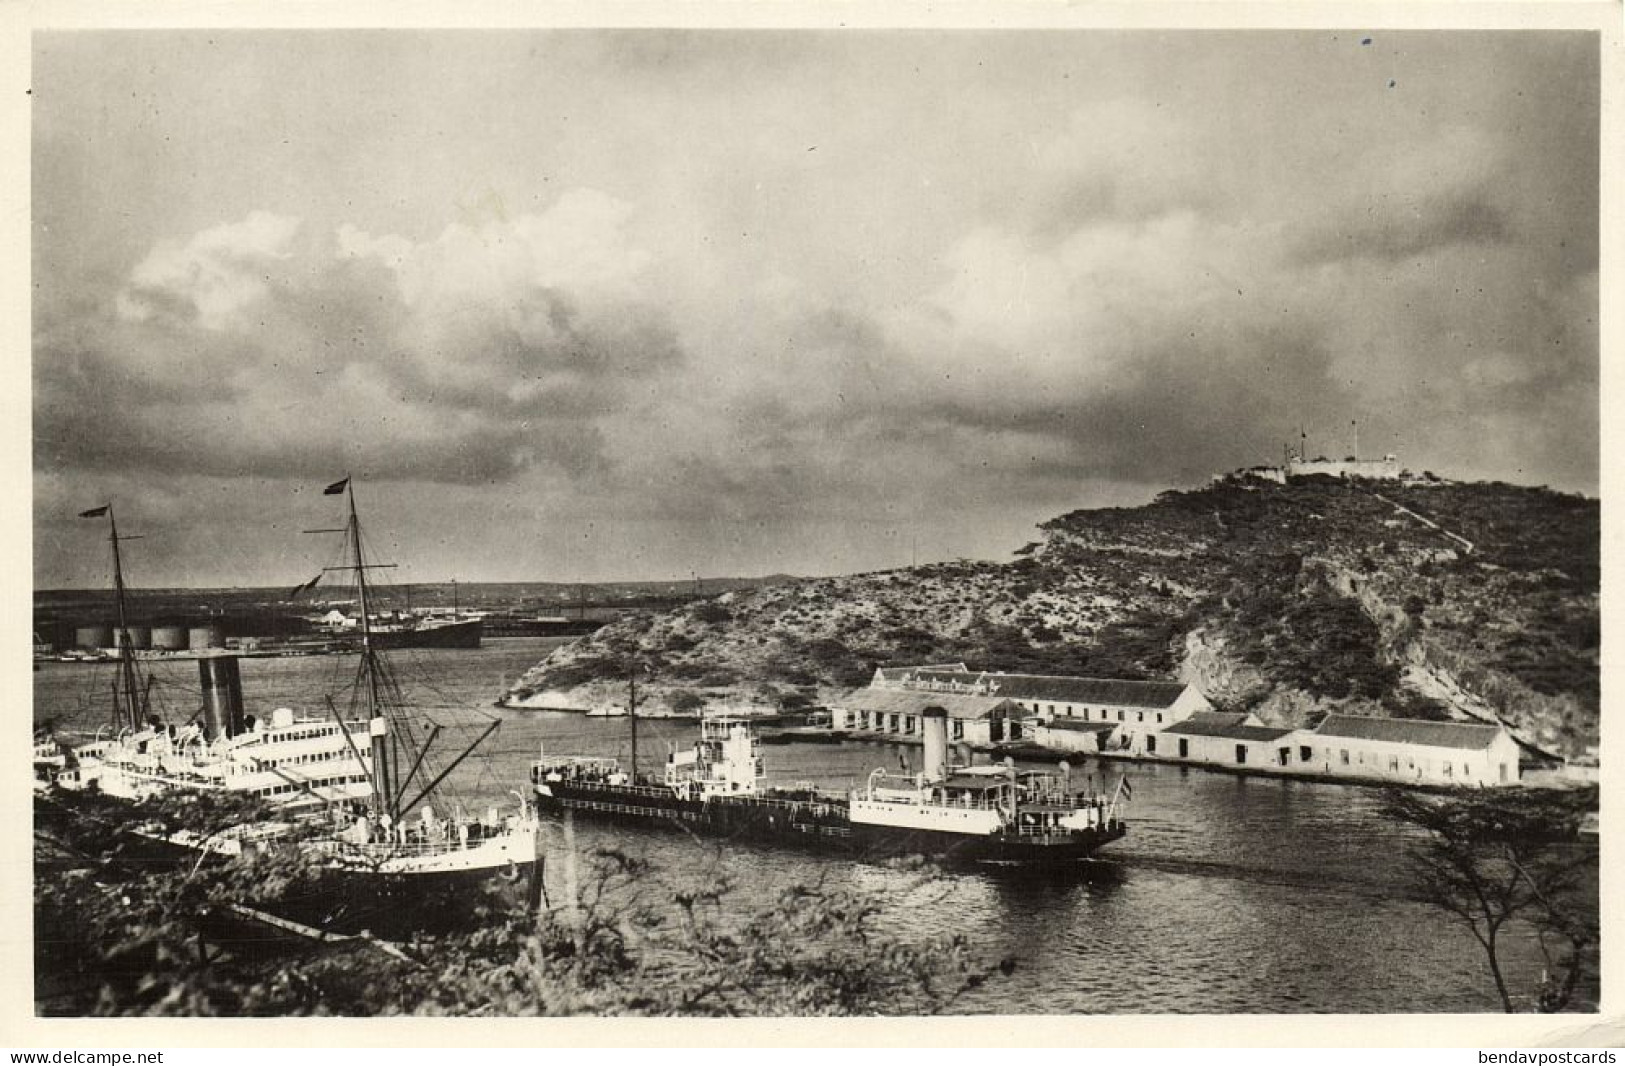 Curacao, N.A., WILLEMSTAD, View Of St. Ana-Bay, Steamer (1950s) RPPC Postcard - Curaçao